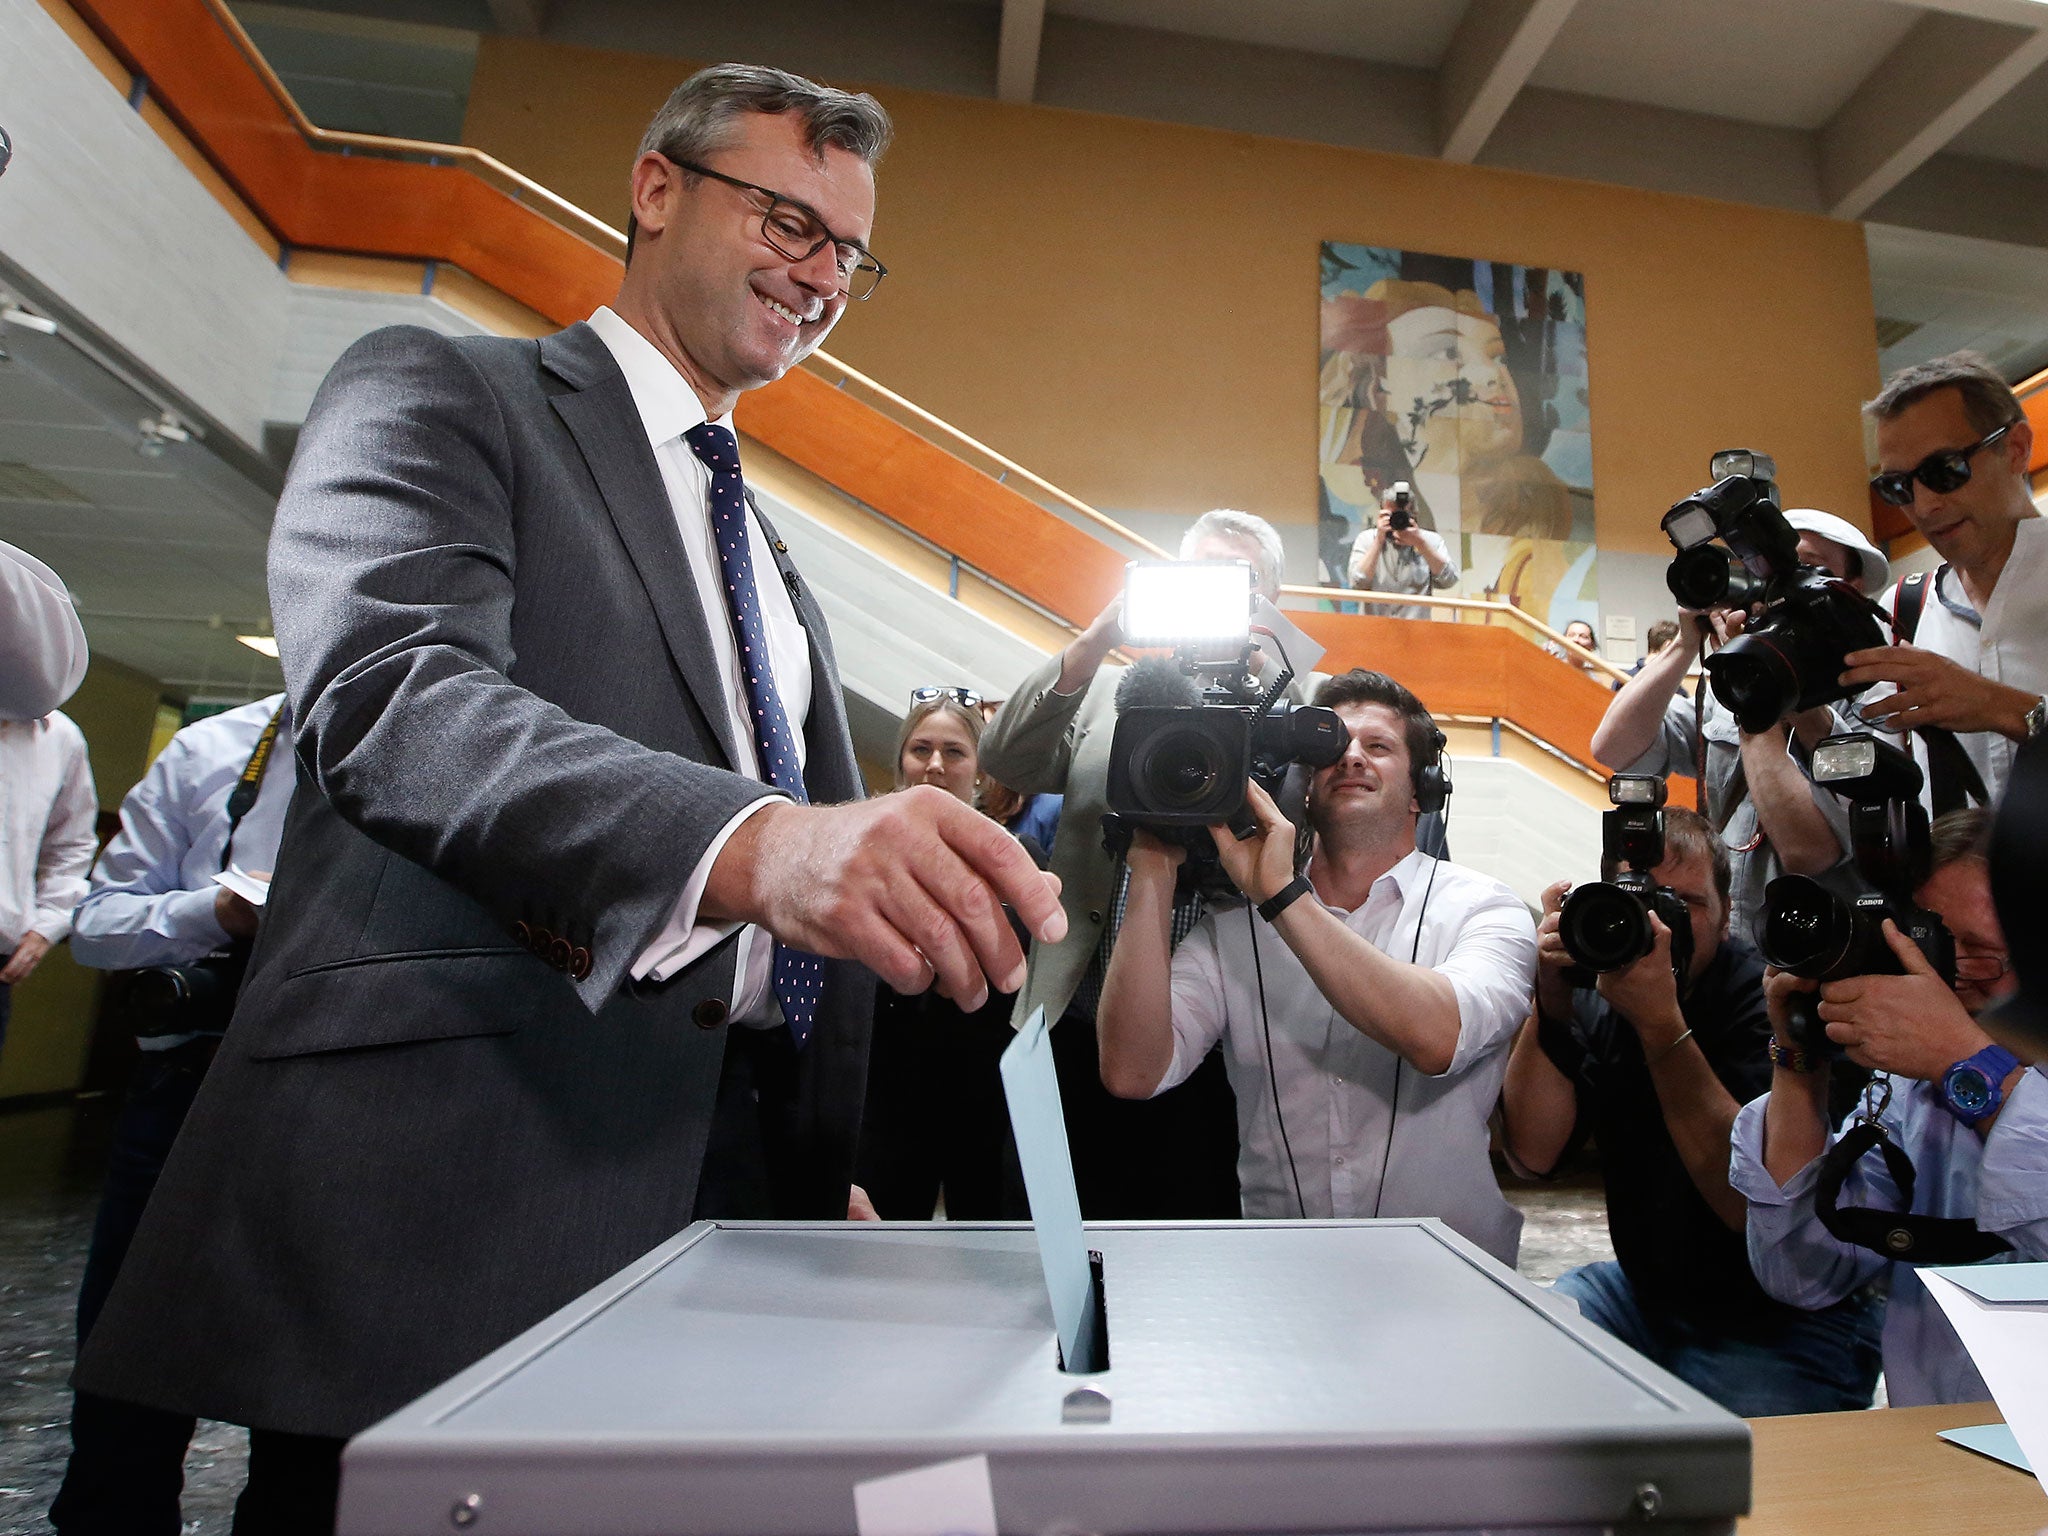 Austrian Freedom Party candidate Norbert Hofer drops his ballot during the second round of Austrian President elections